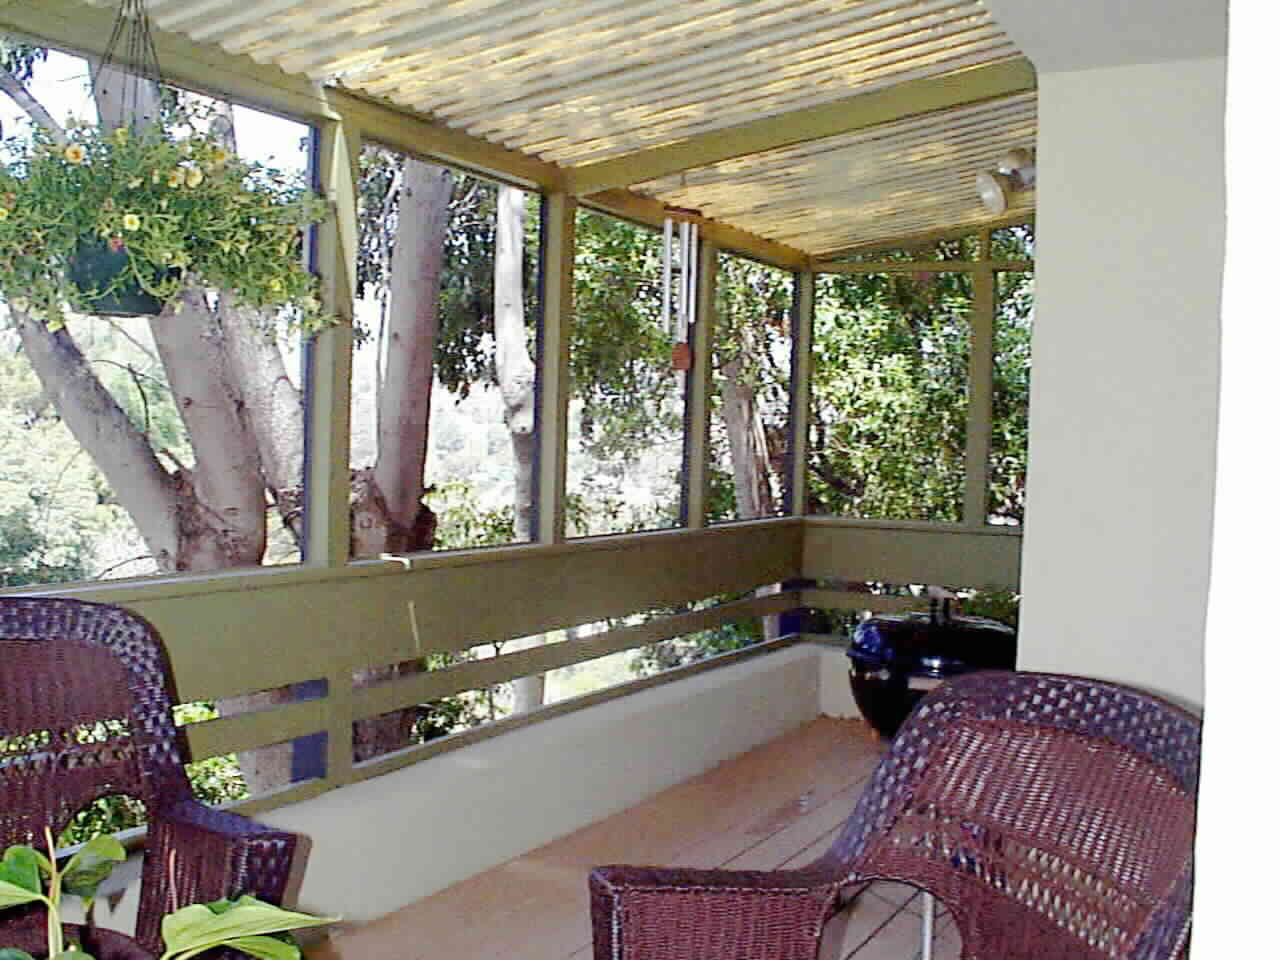 The 9 x 22 Secluded Serene Screened Porch... Nap Here !